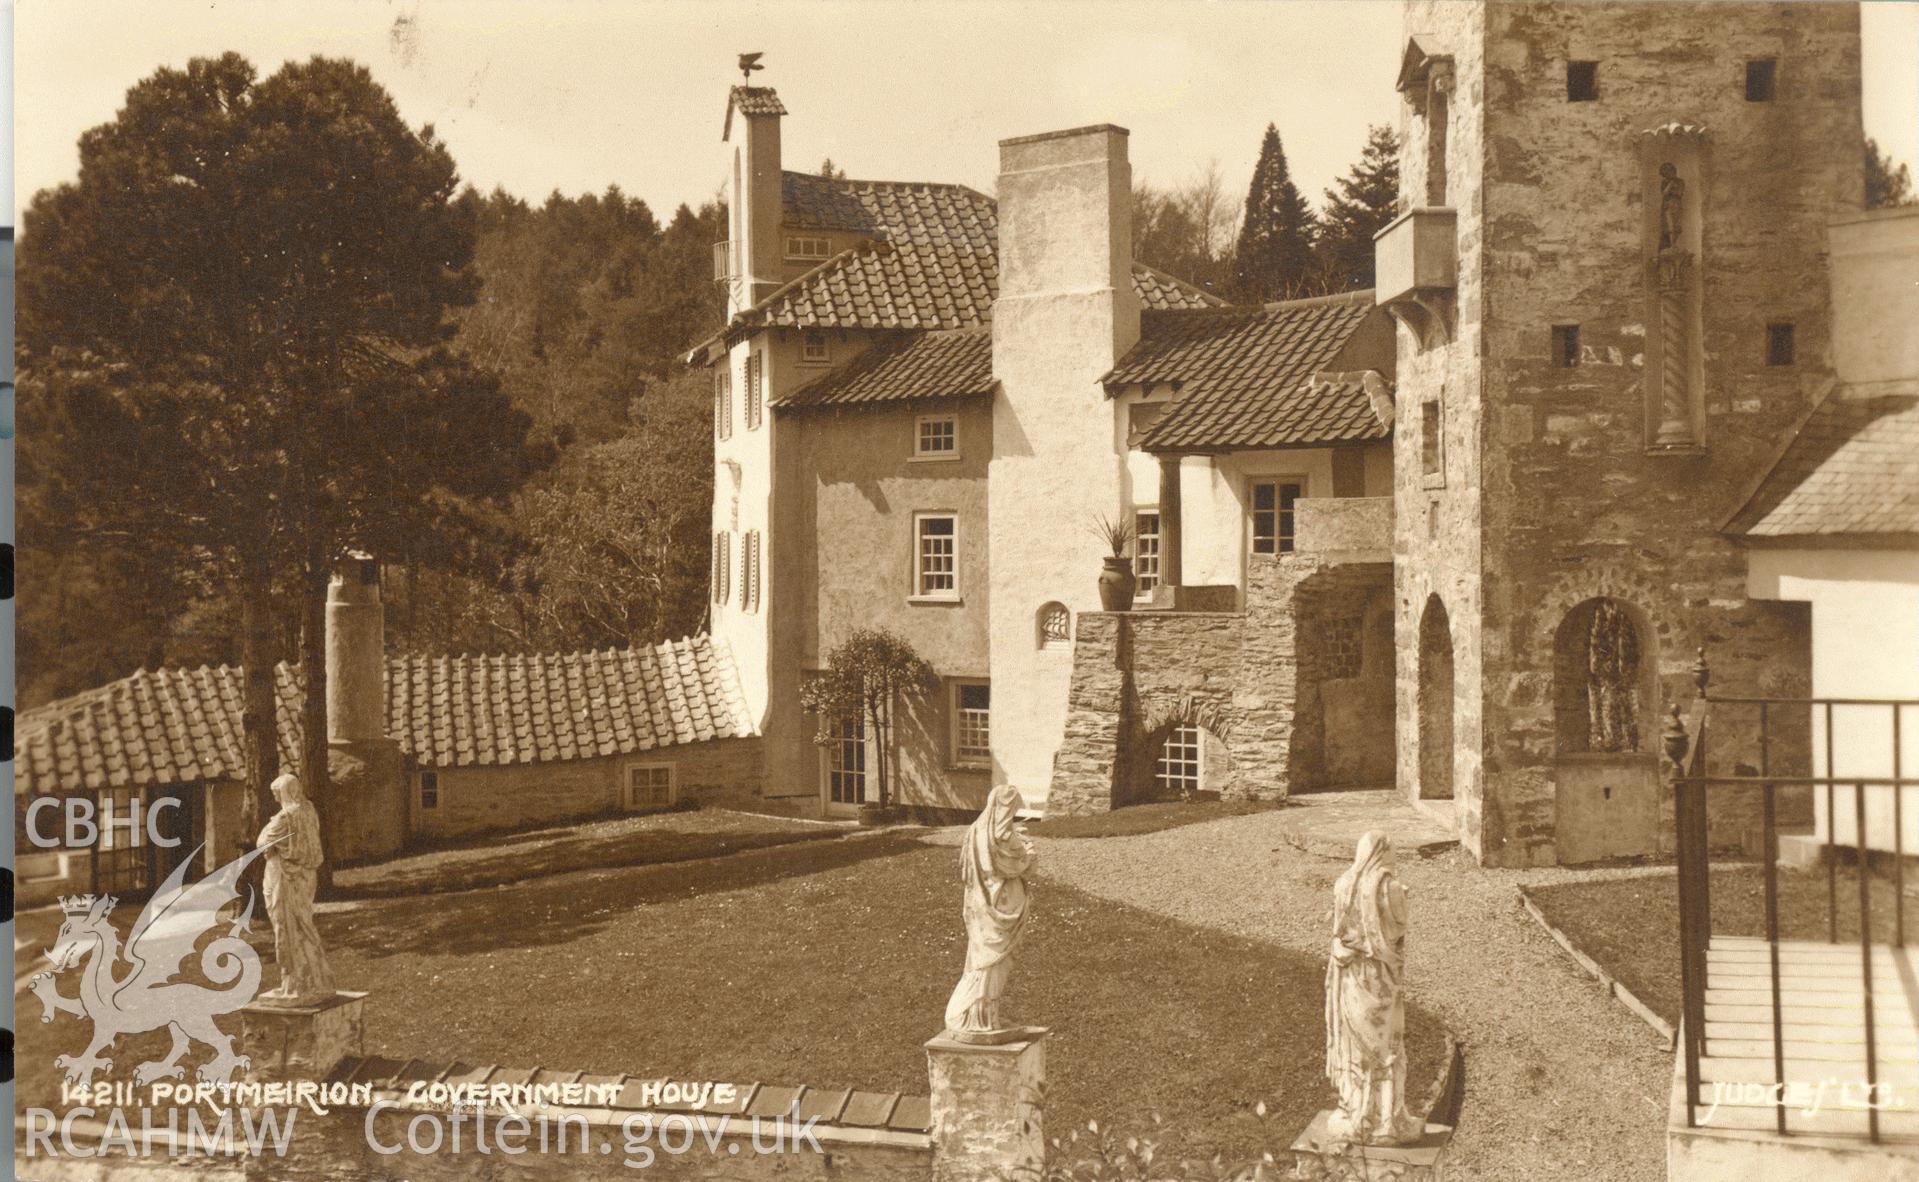 Digitised postcard image of Portmeirion village, Penrhyndeudraeth, including Government House, Judges Ltd. Produced by Parks and Gardens Data Services, from an original item in the Peter Davis Collection at Parks and Gardens UK. We hold only web-resolution images of this collection, suitable for viewing on screen and for research purposes only. We do not hold the original images, or publication quality scans.